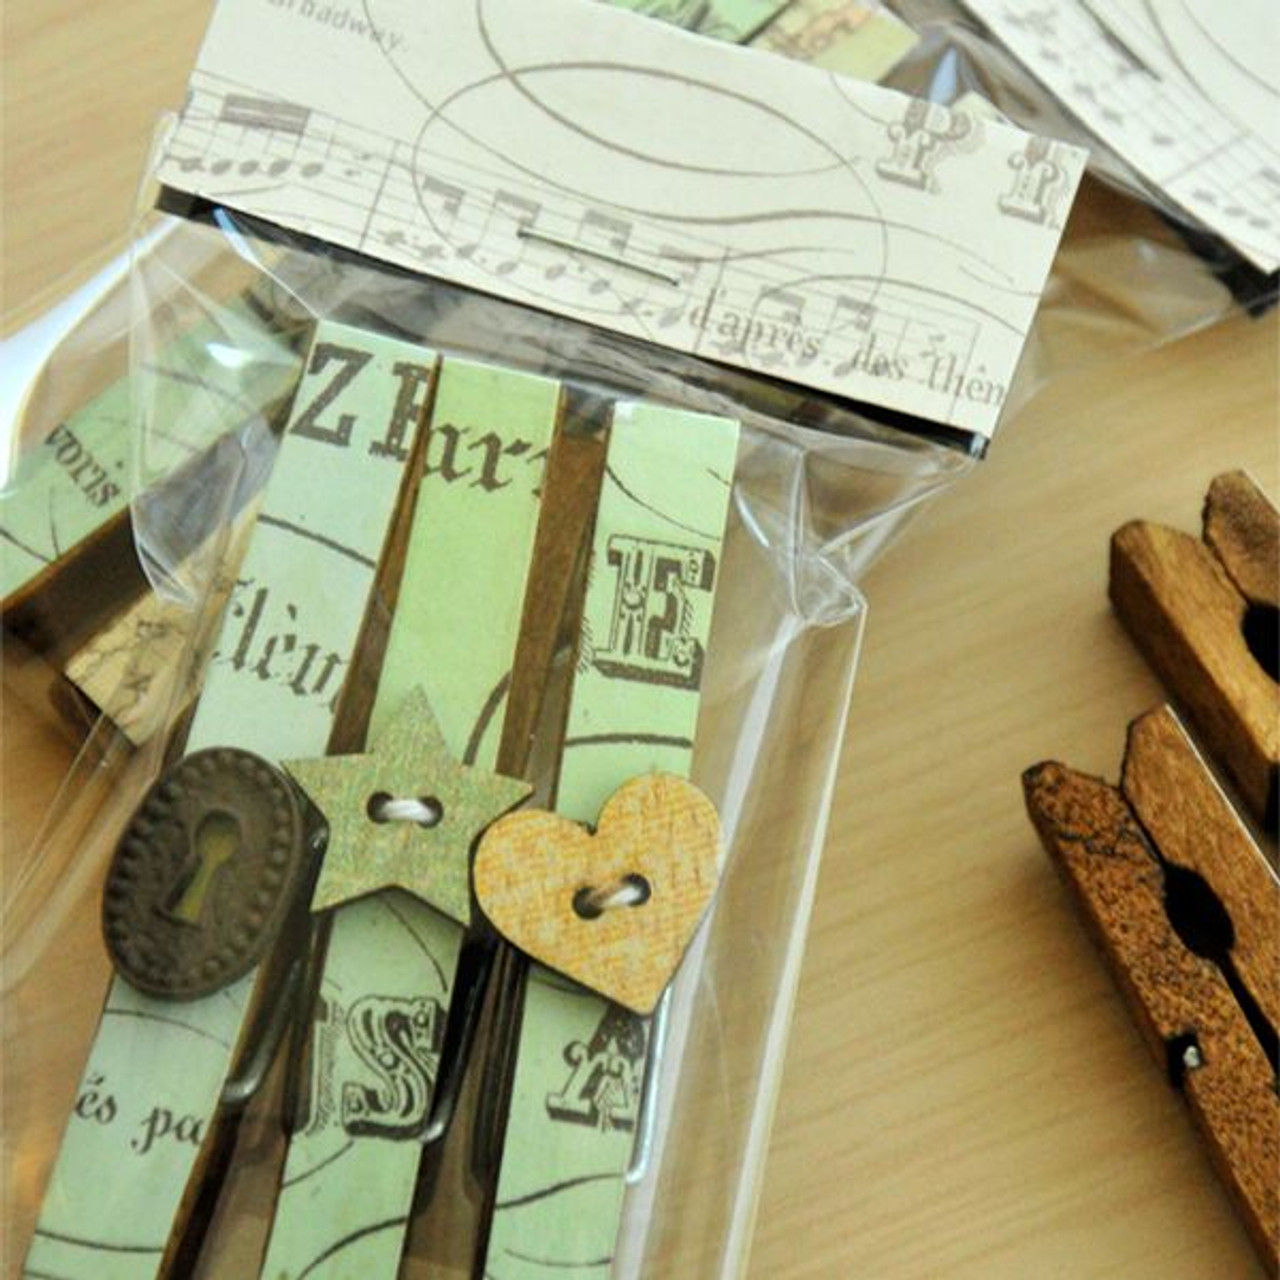 Inspirational Stamped Clothespins - Around the House - All Free Crafts